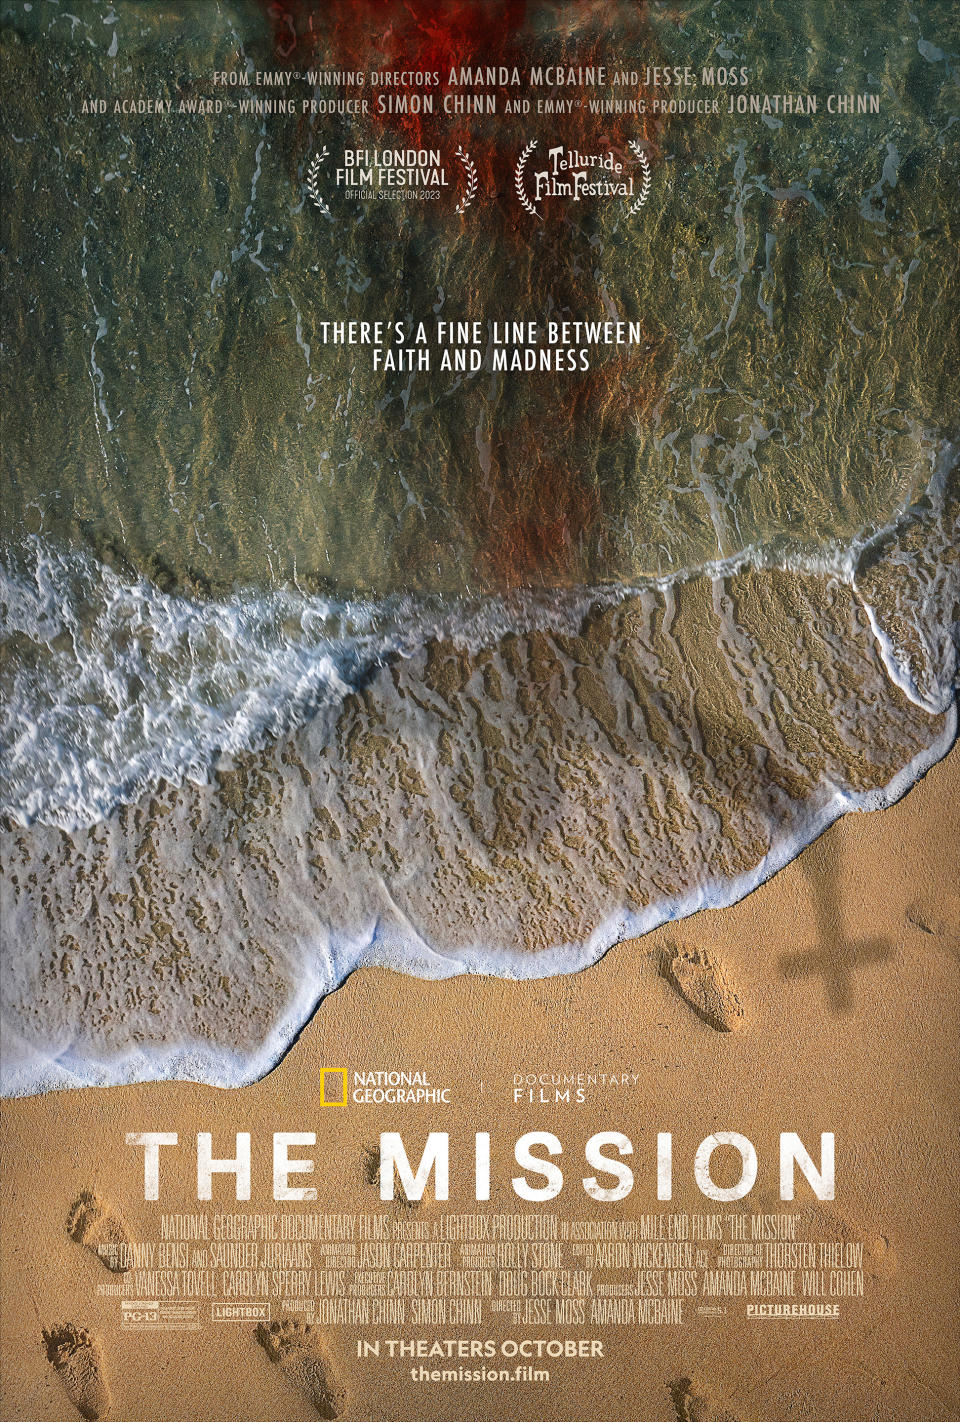 'The Mission' poster